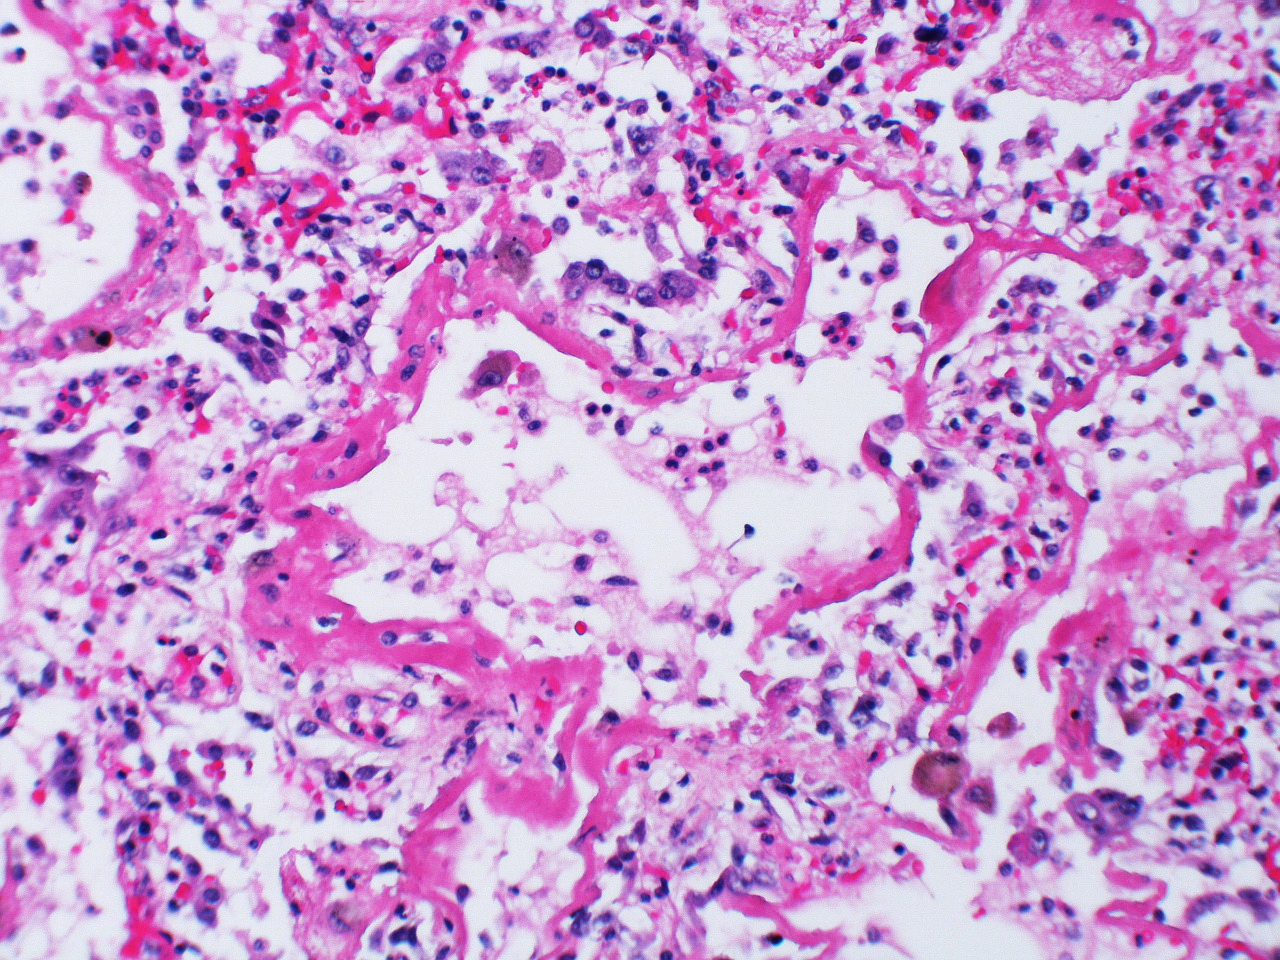 Histological image of three alveolar spaces with debris inside of airspace and thickened interstitial space between the alveoli.